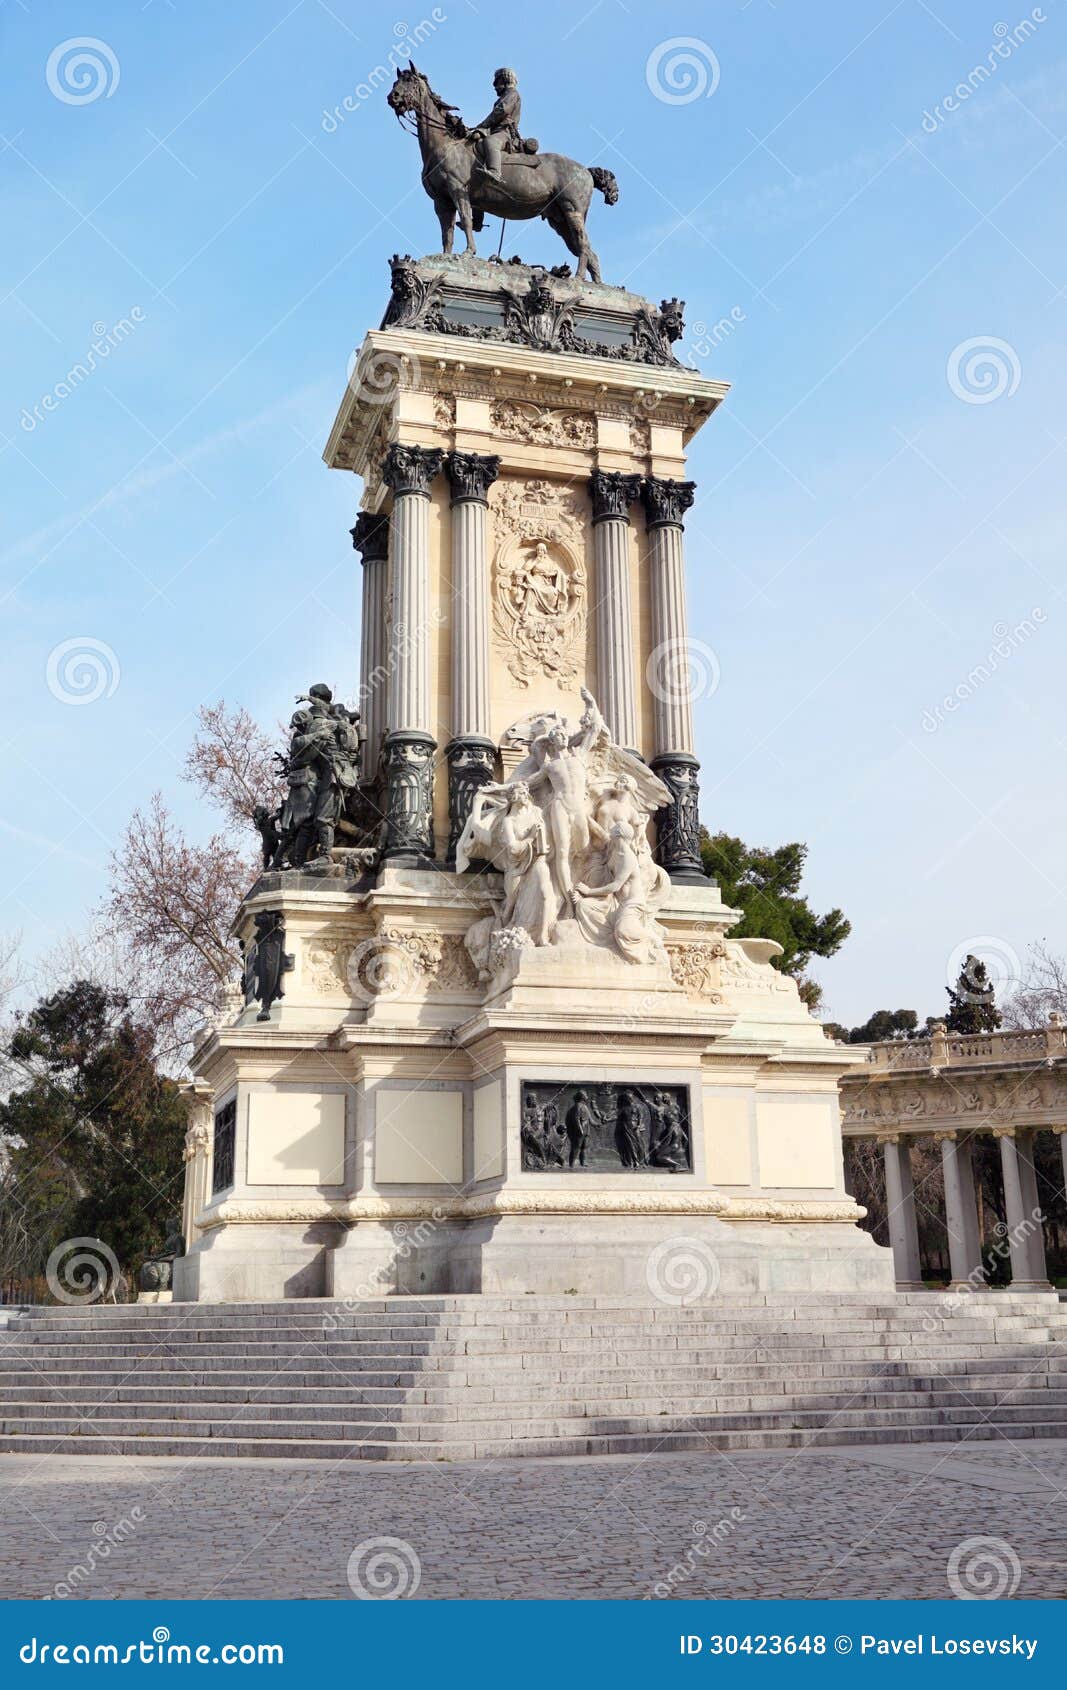 equestrian monument to alfonso xii in retiro park